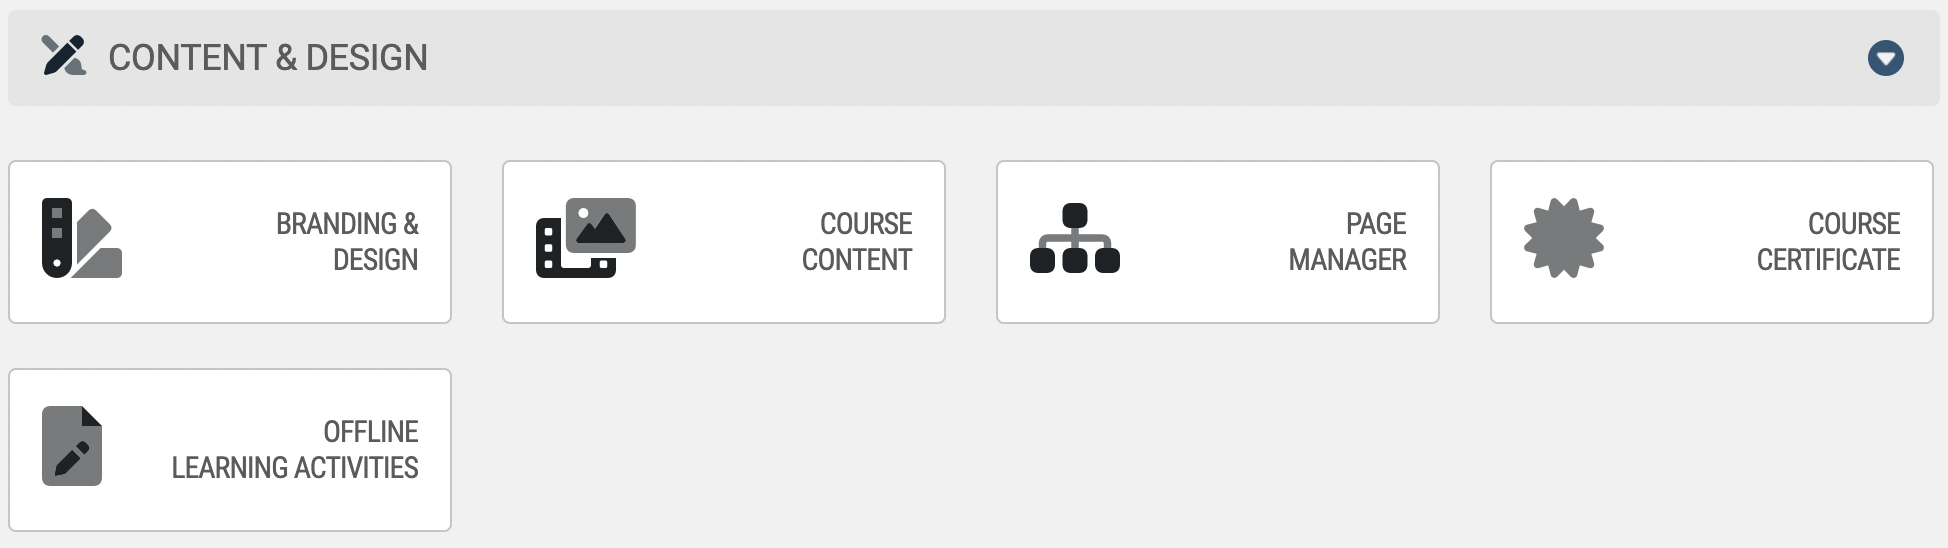 Course Page Manager